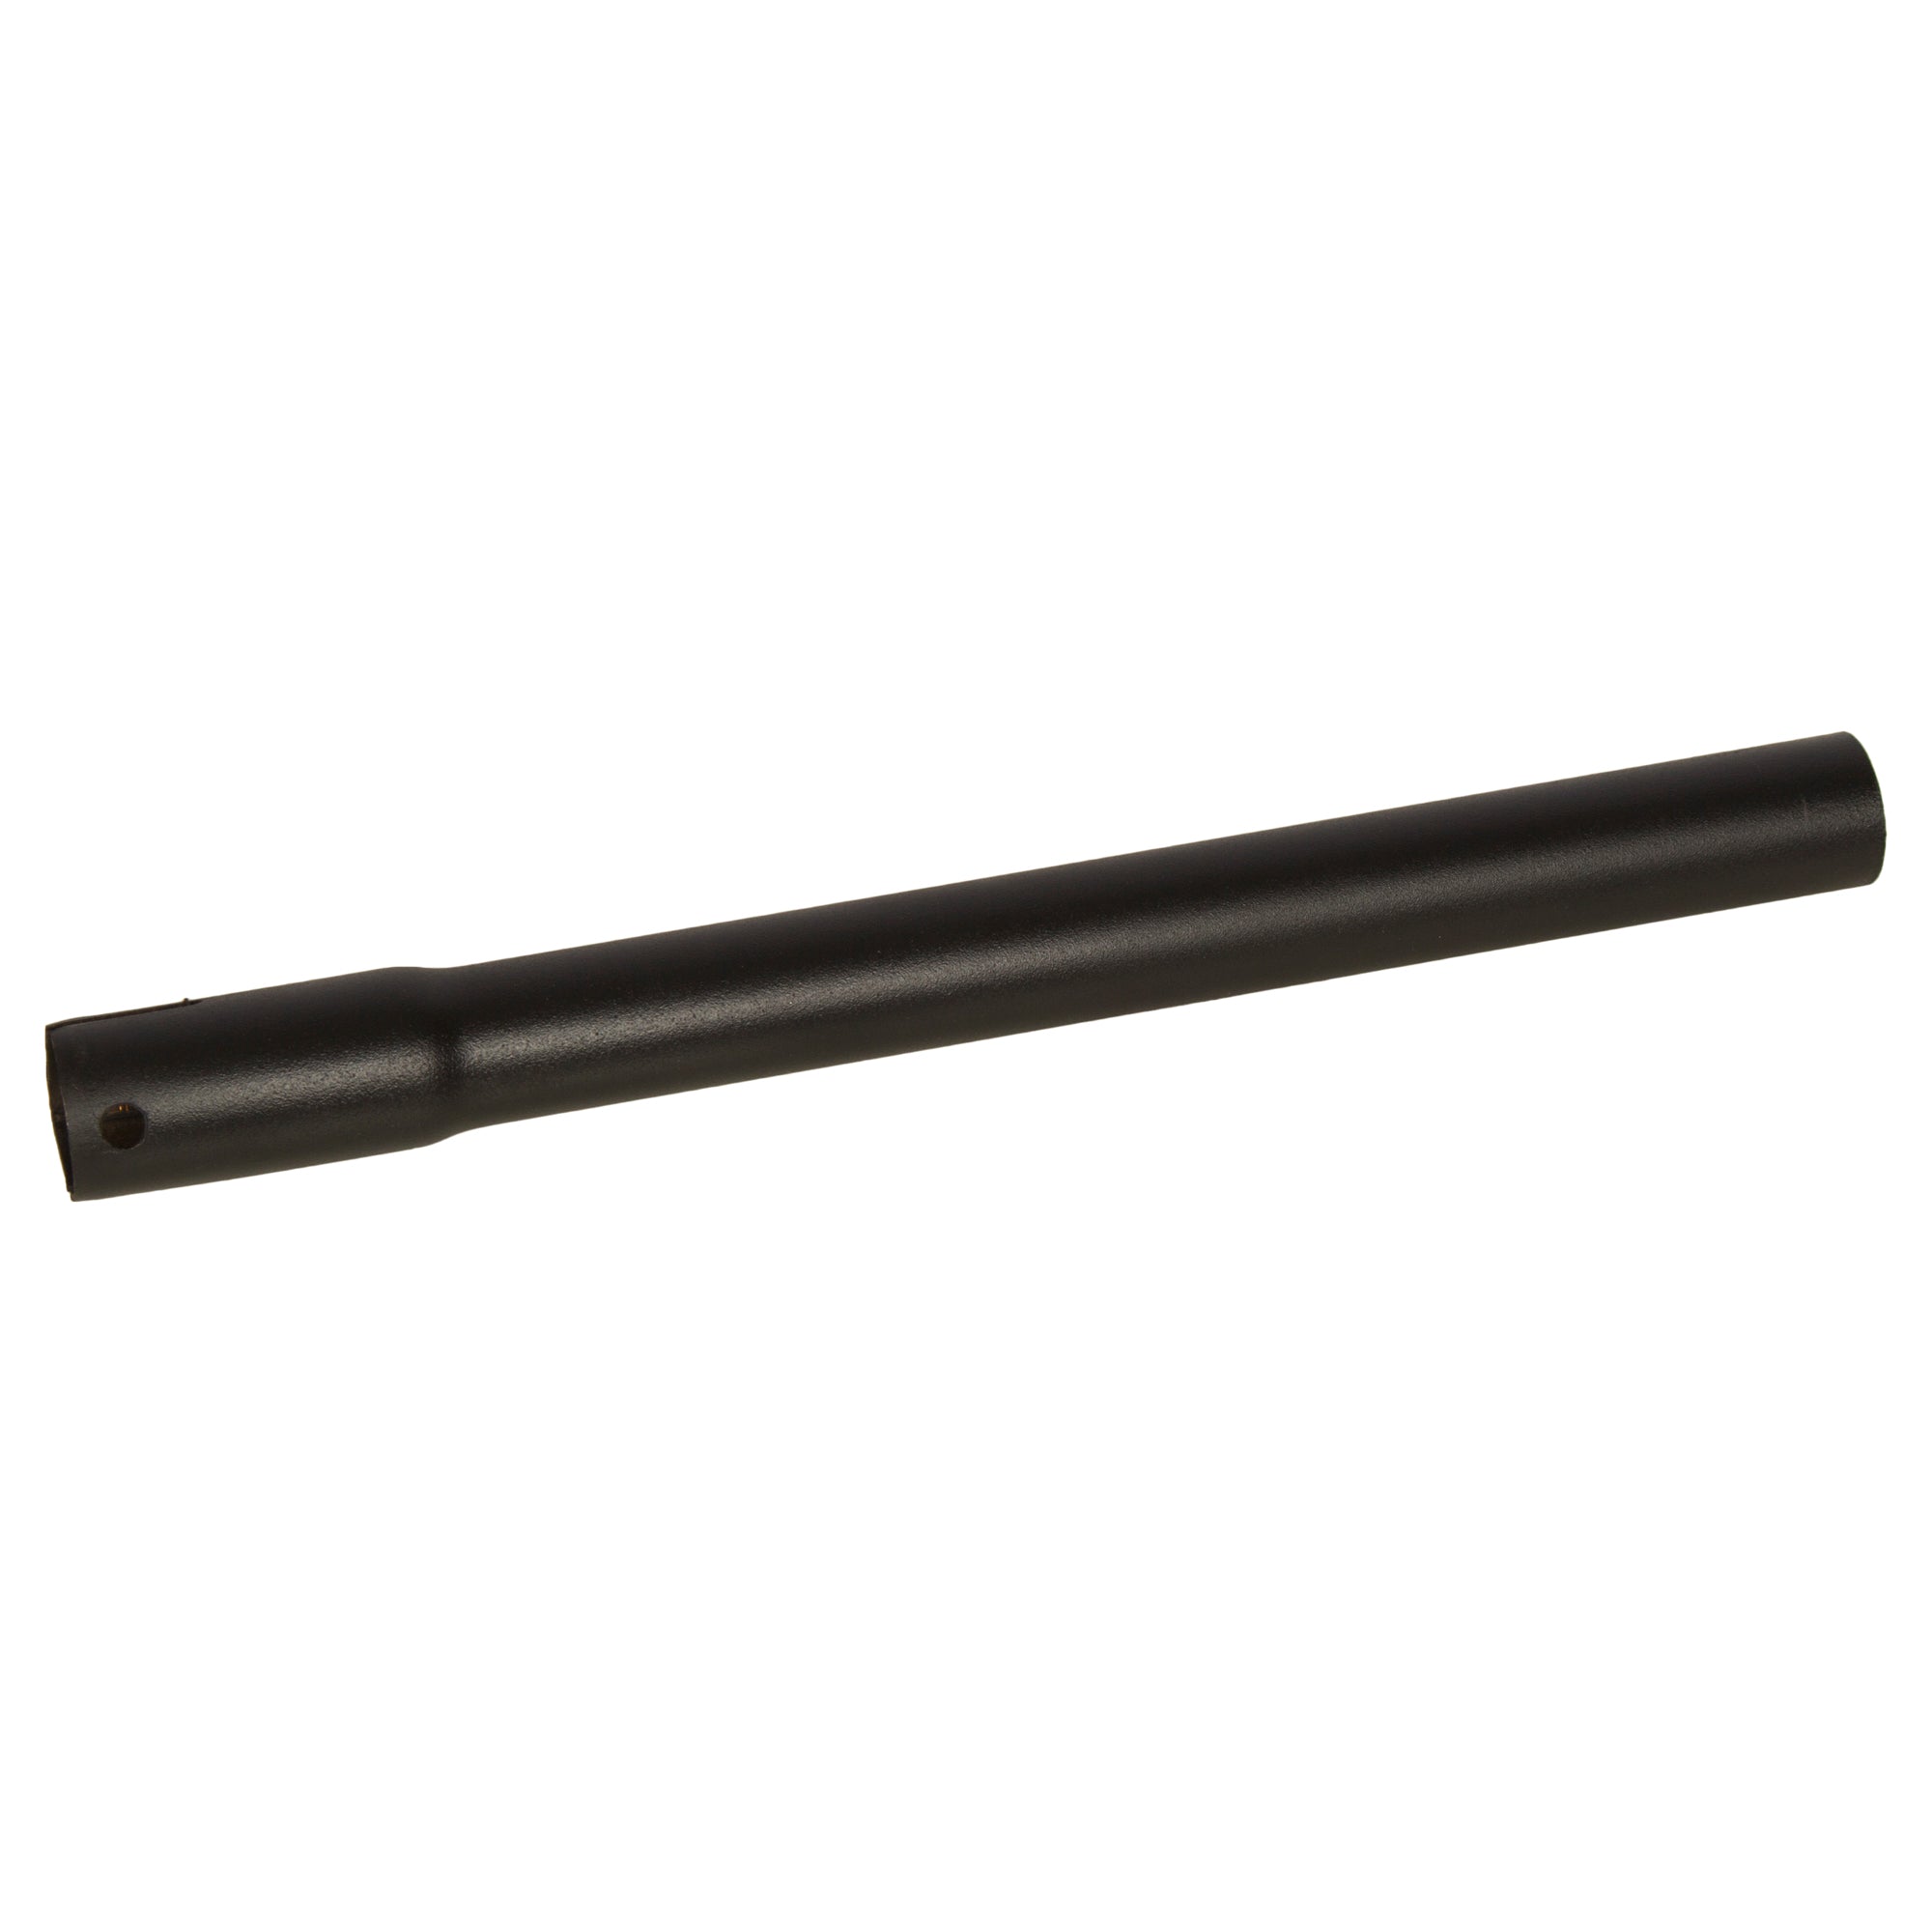 Exhaust Pipe Stack Replacement UNIVERSAL - 1" x 12", Straight Black